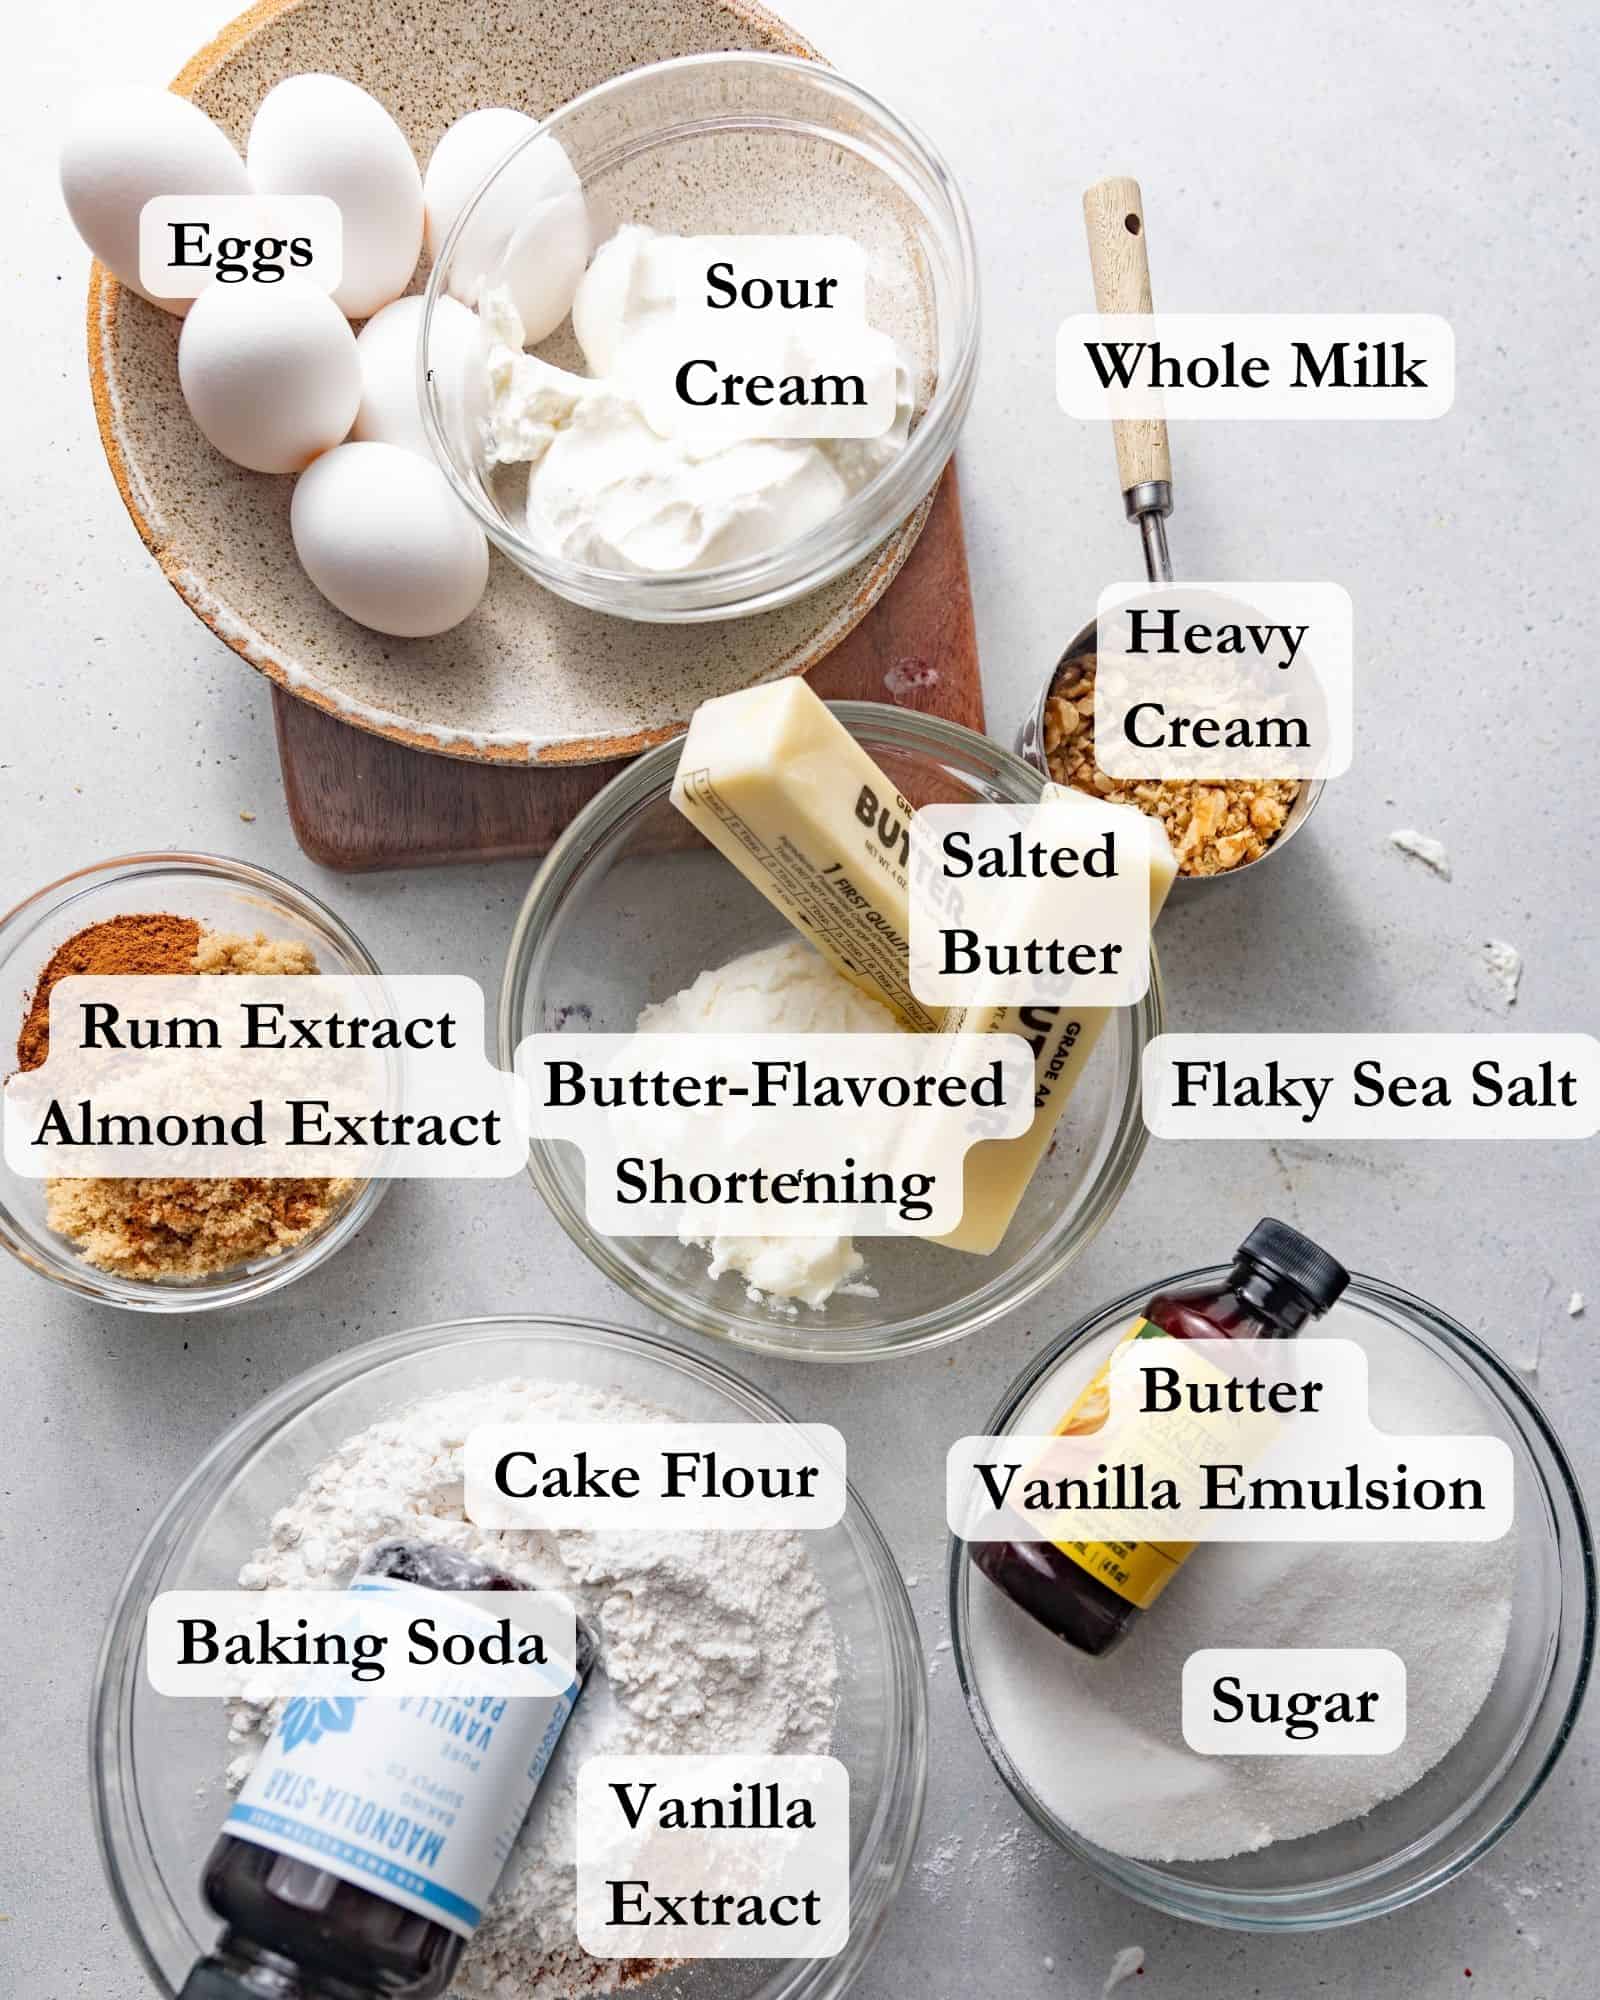 salted caramel kentucky butter cake ingredients - cake flour, sugar, eggs, shortening, rum extract, butter emulsion, heavy cream, almond extract, vanilla extract, butter, sour cream, and milk.